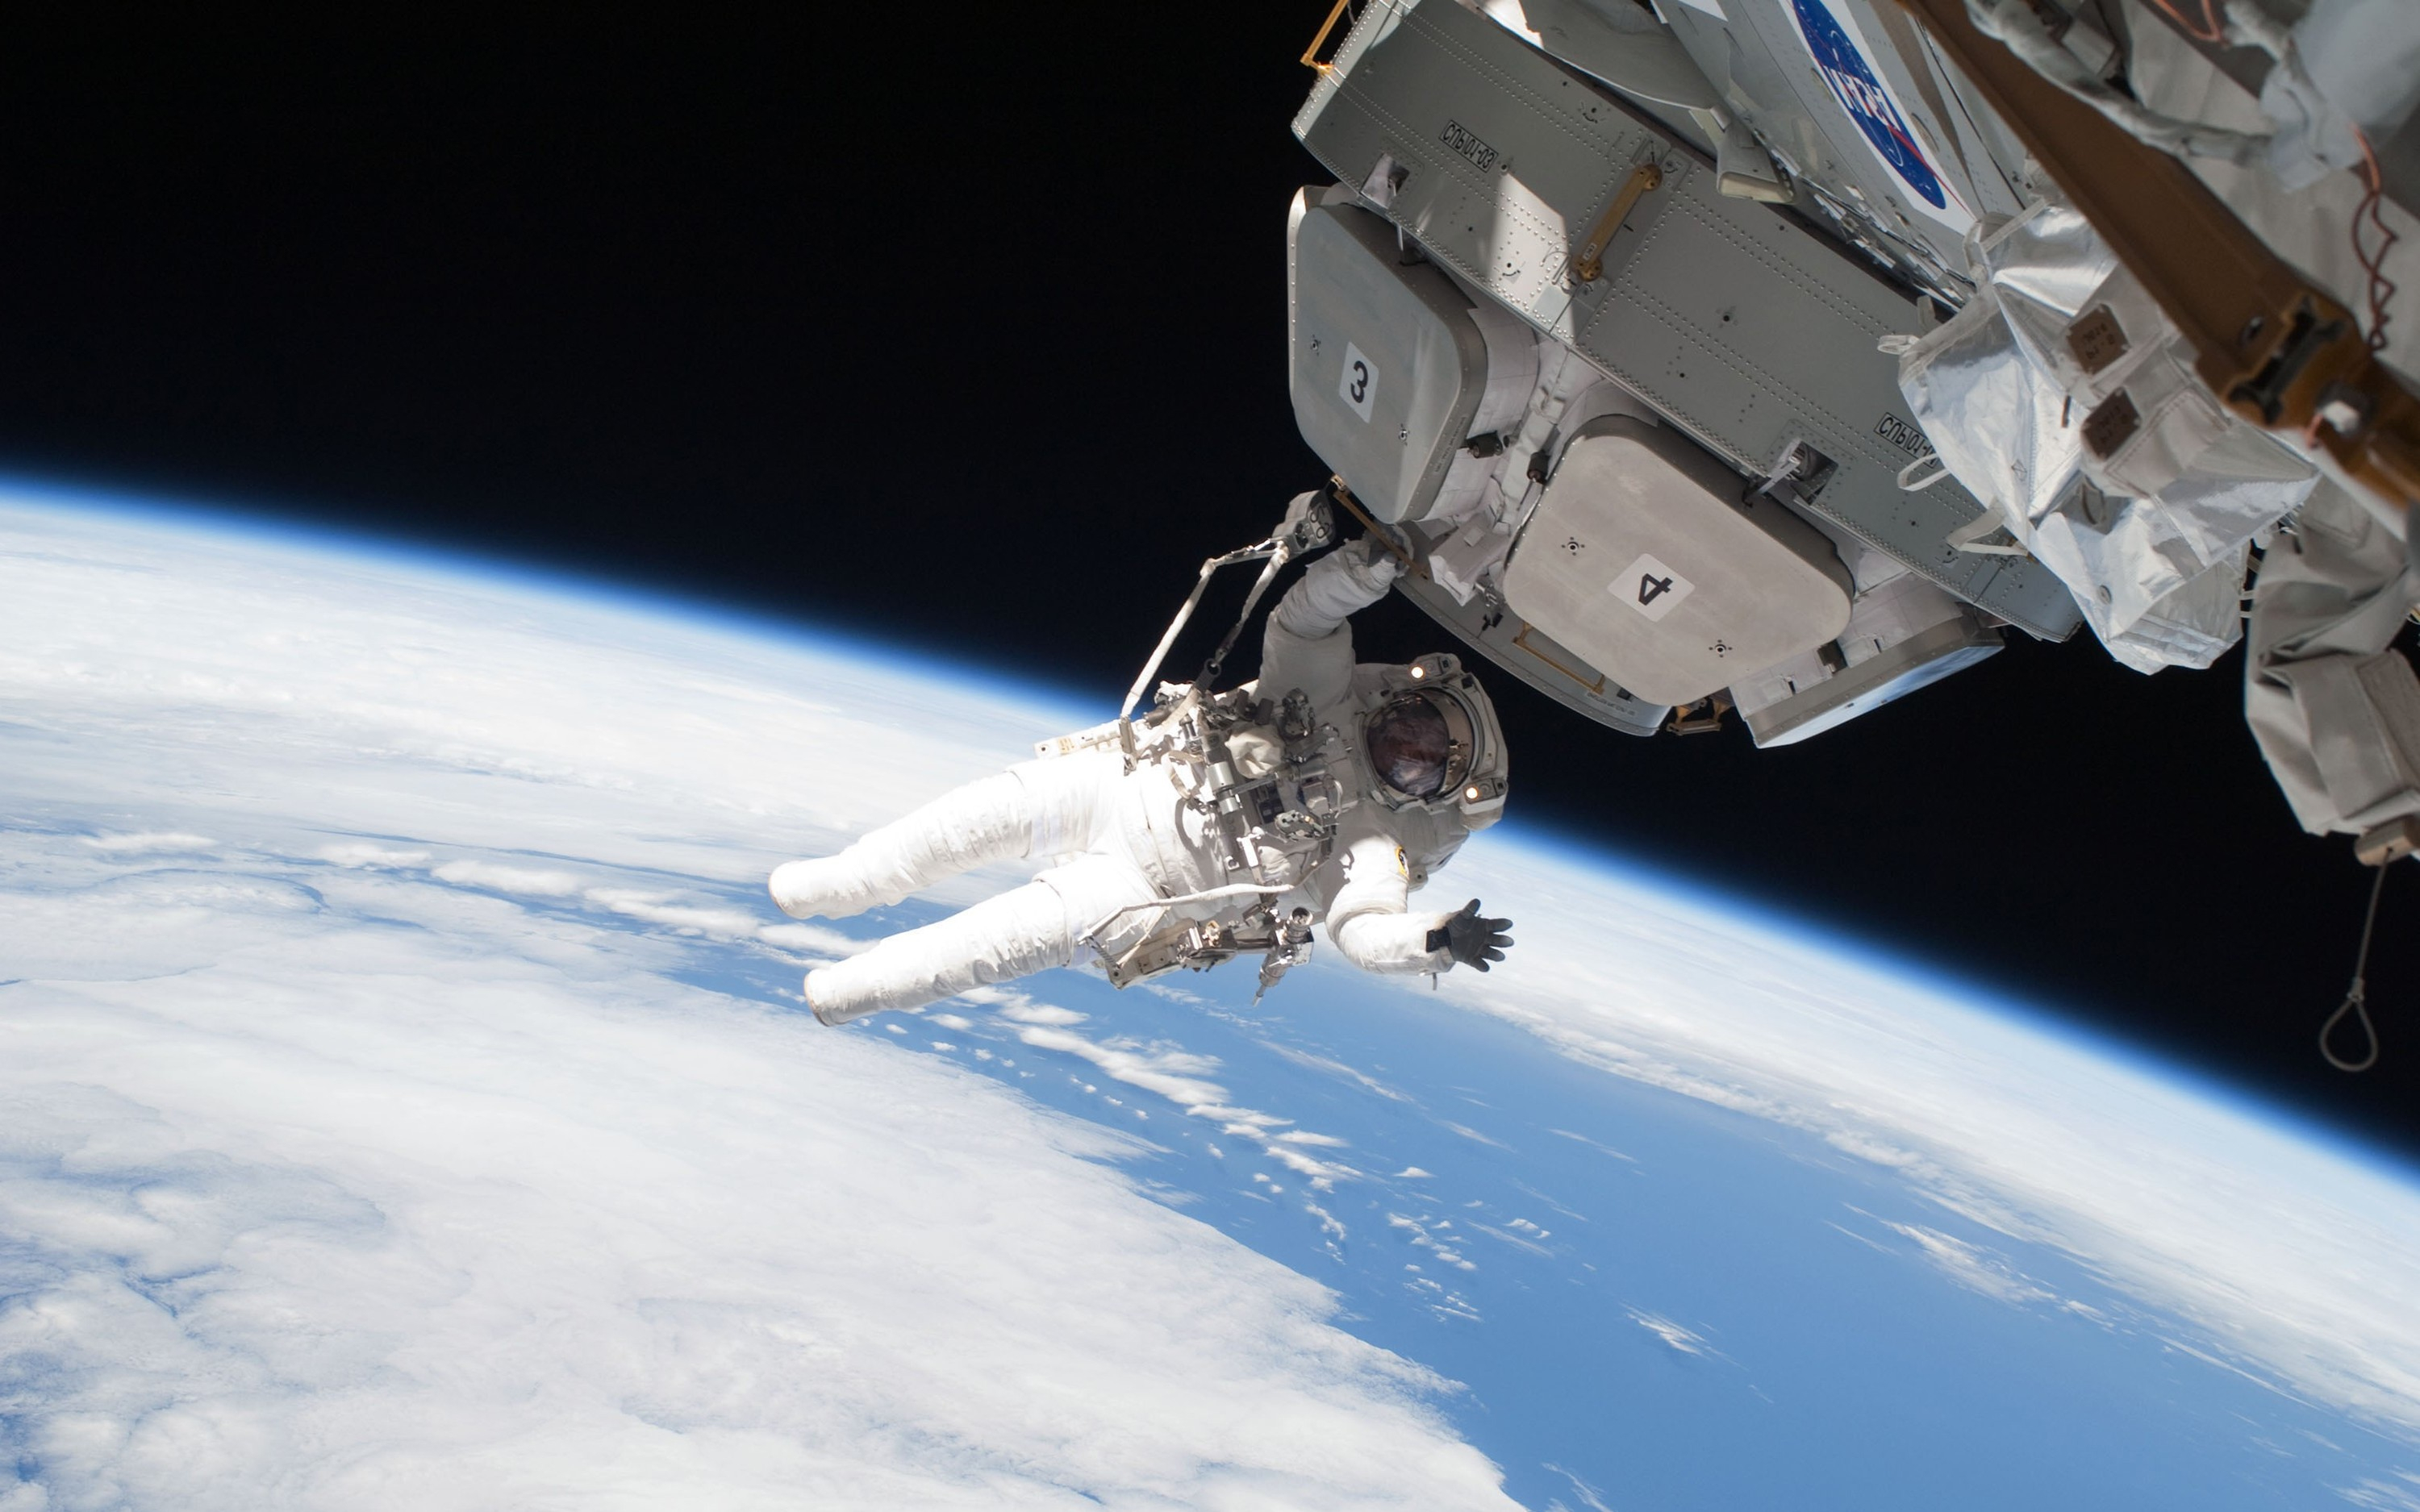 3000x1875 Wallpaper : px, astronaut, Earth, International Space Station, NASA, space wallhaven 676863 HD Wallpapers